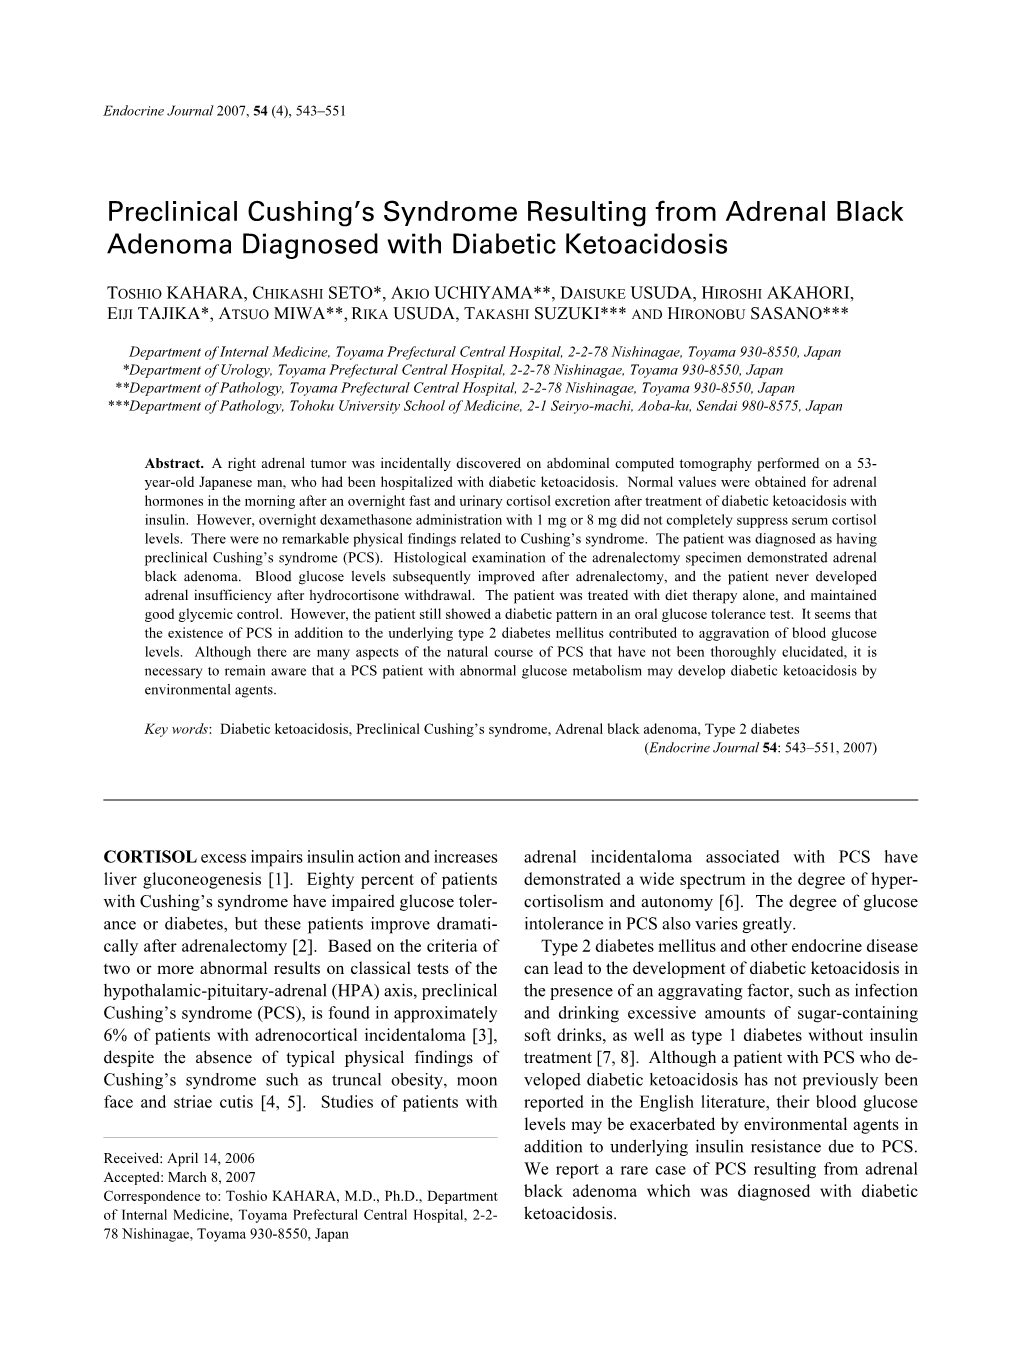 Preclinical Cushing's Syndrome Resulting from Adrenal Black